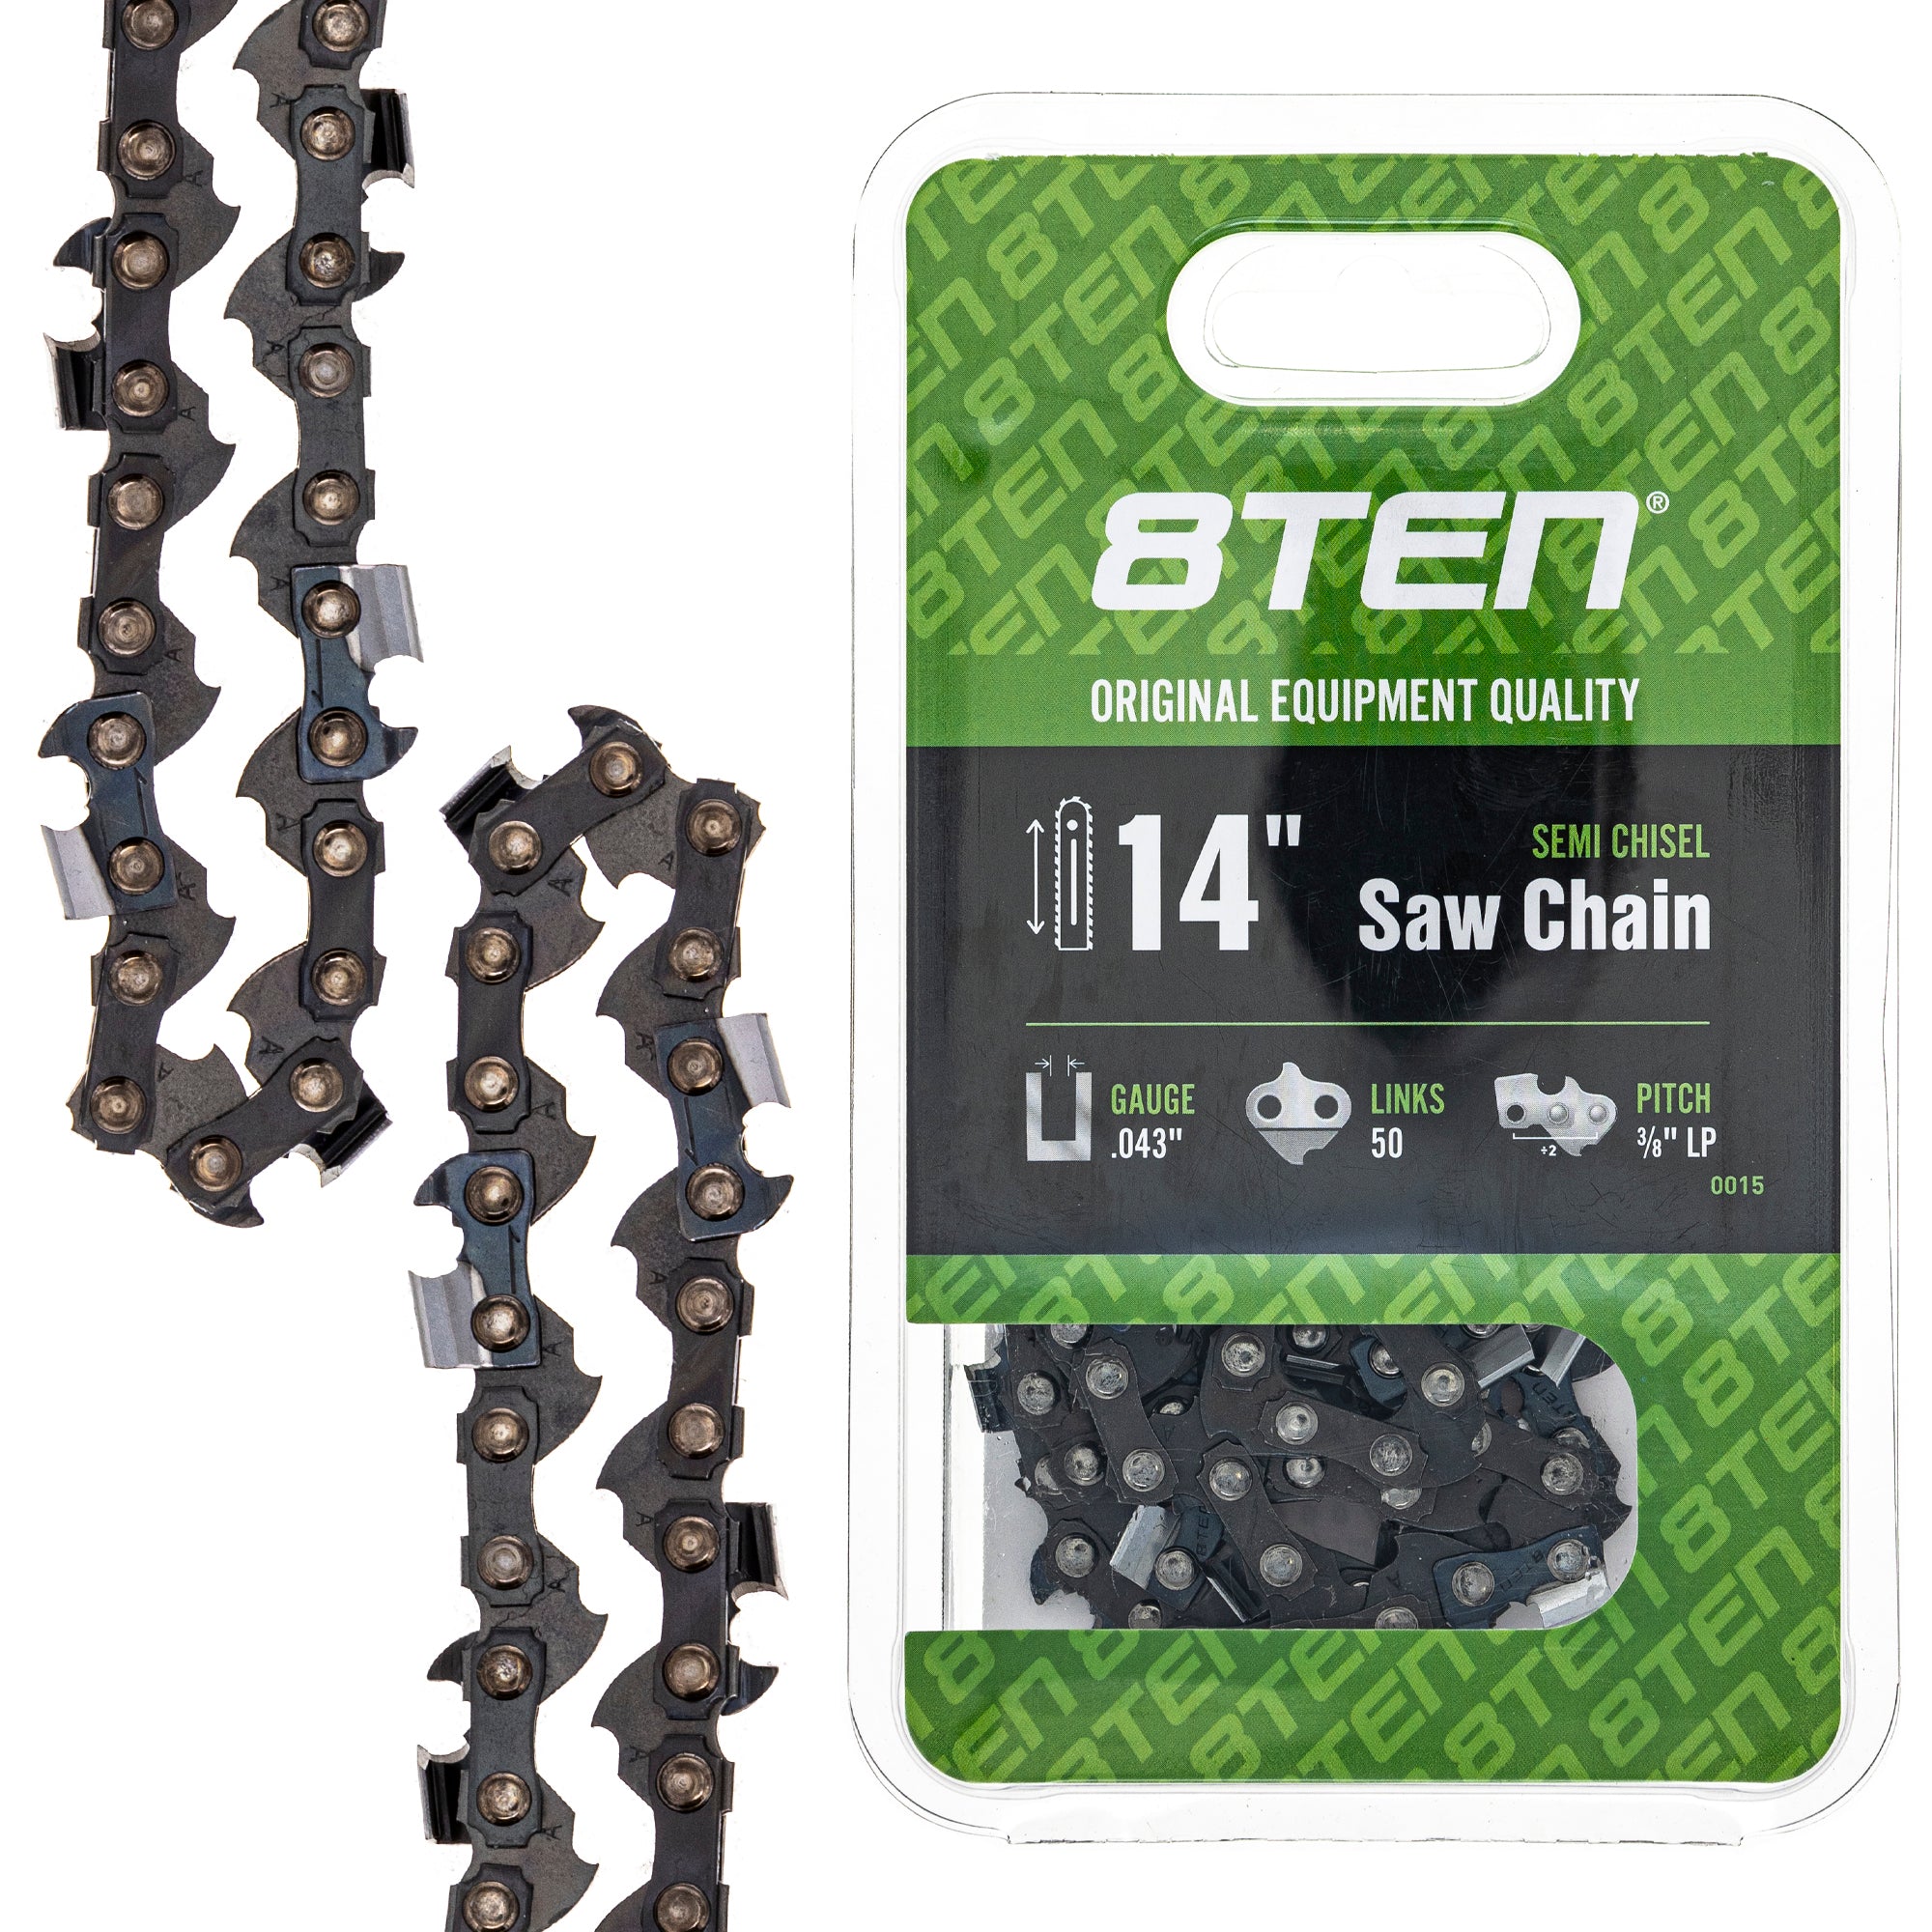 8TEN 810-CCC2237H Chain 6-Pack for zOTHER Stens Oregon Carlton MSE